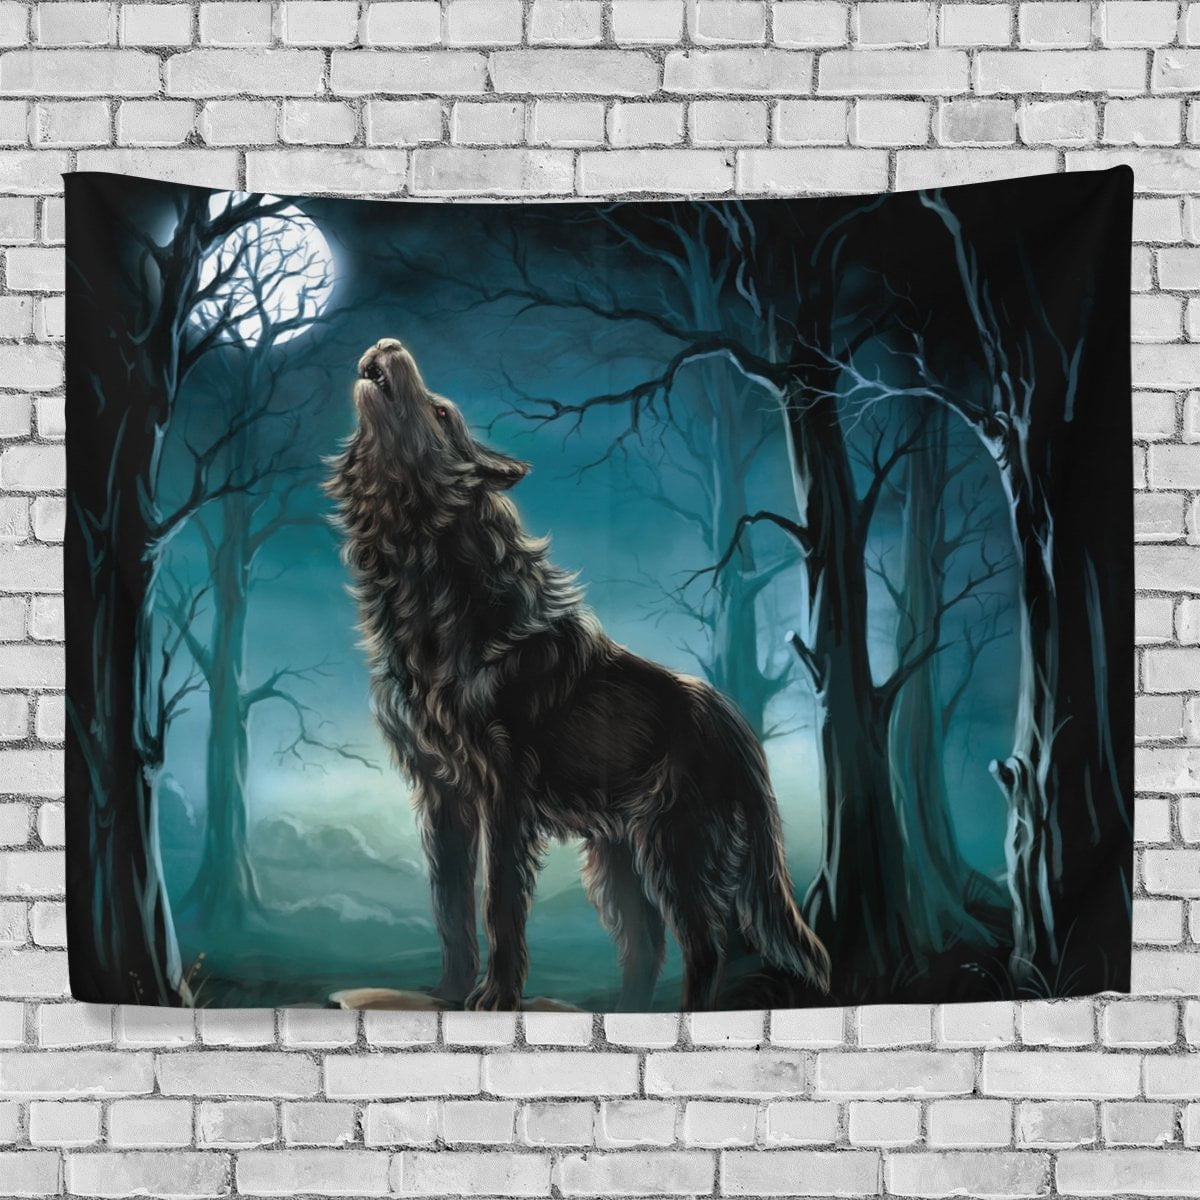 Oil Paint Wolves at Night Bedroom Living Room Dorm Wall Hanging Tapestry Blanket